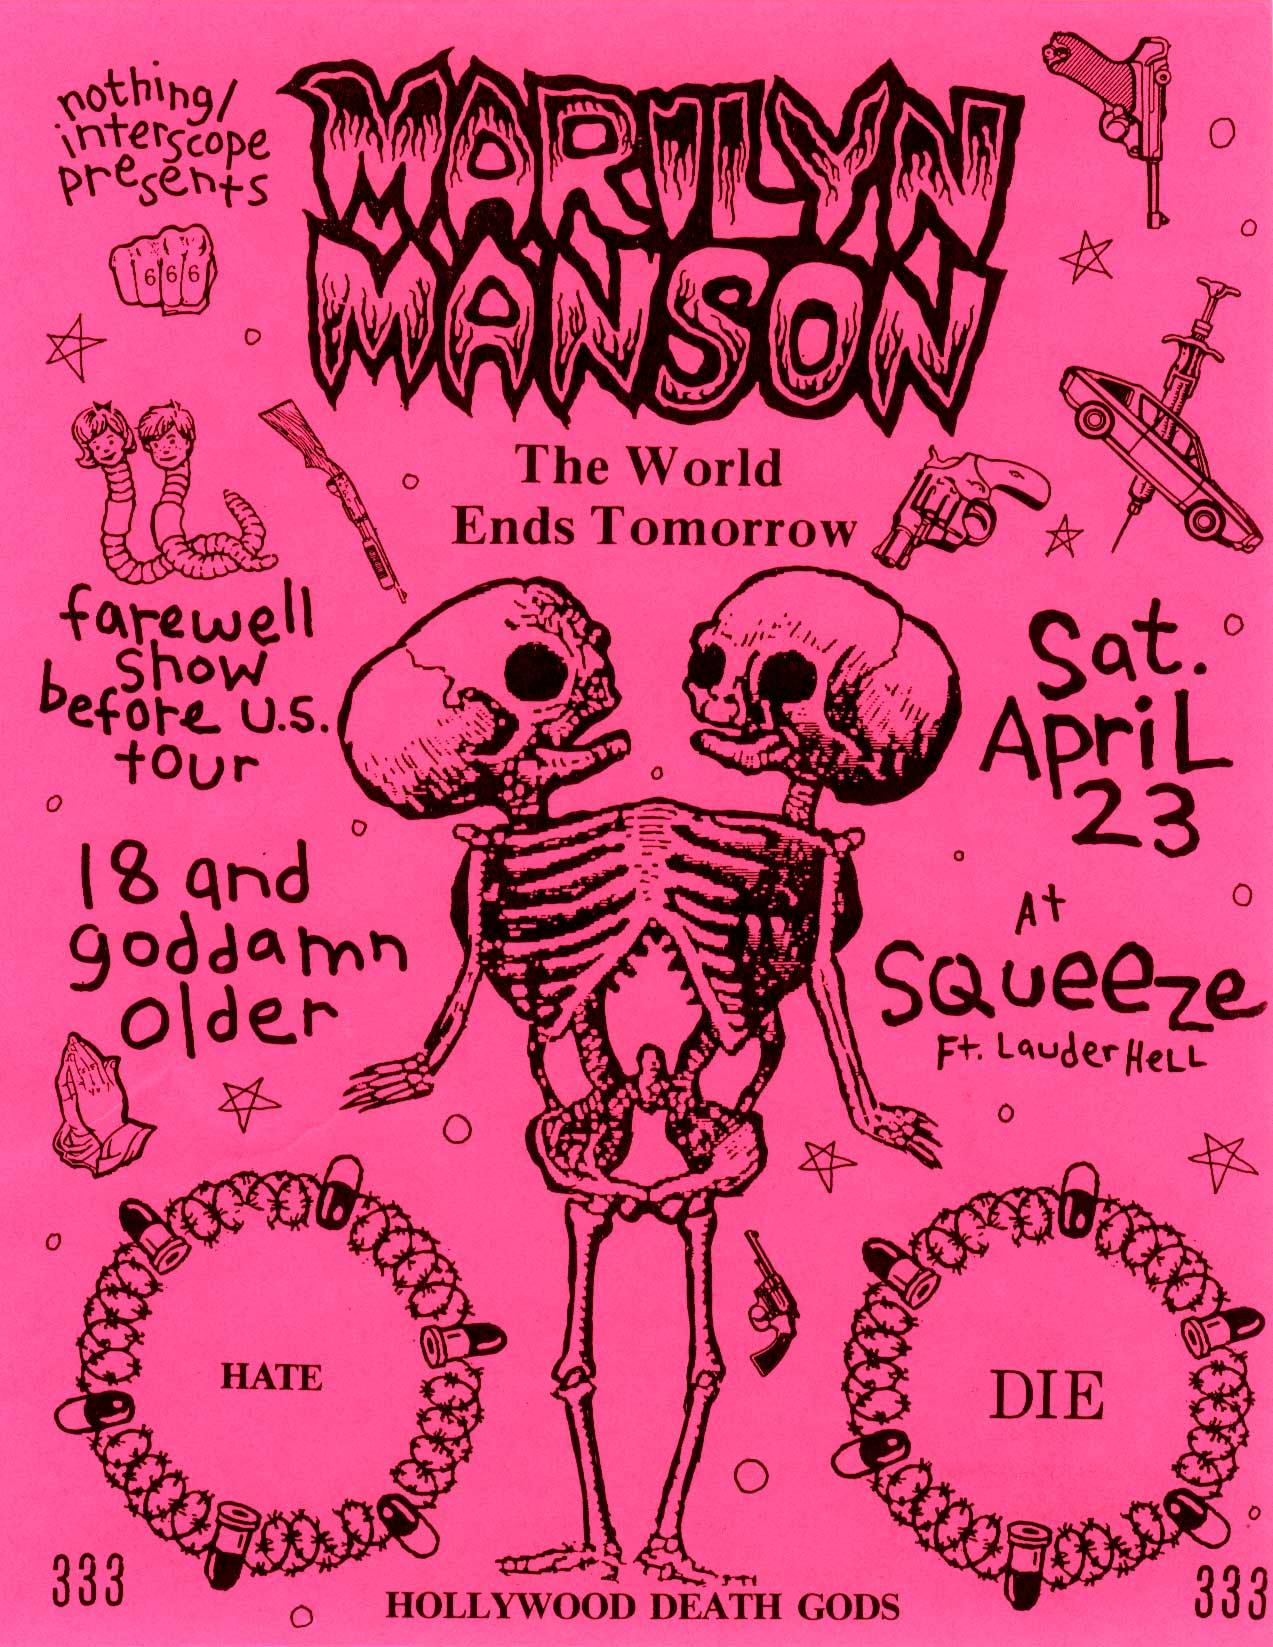 April 23, 1994 performance at Squeeze in Fort Lauderdale, Florida, USA.